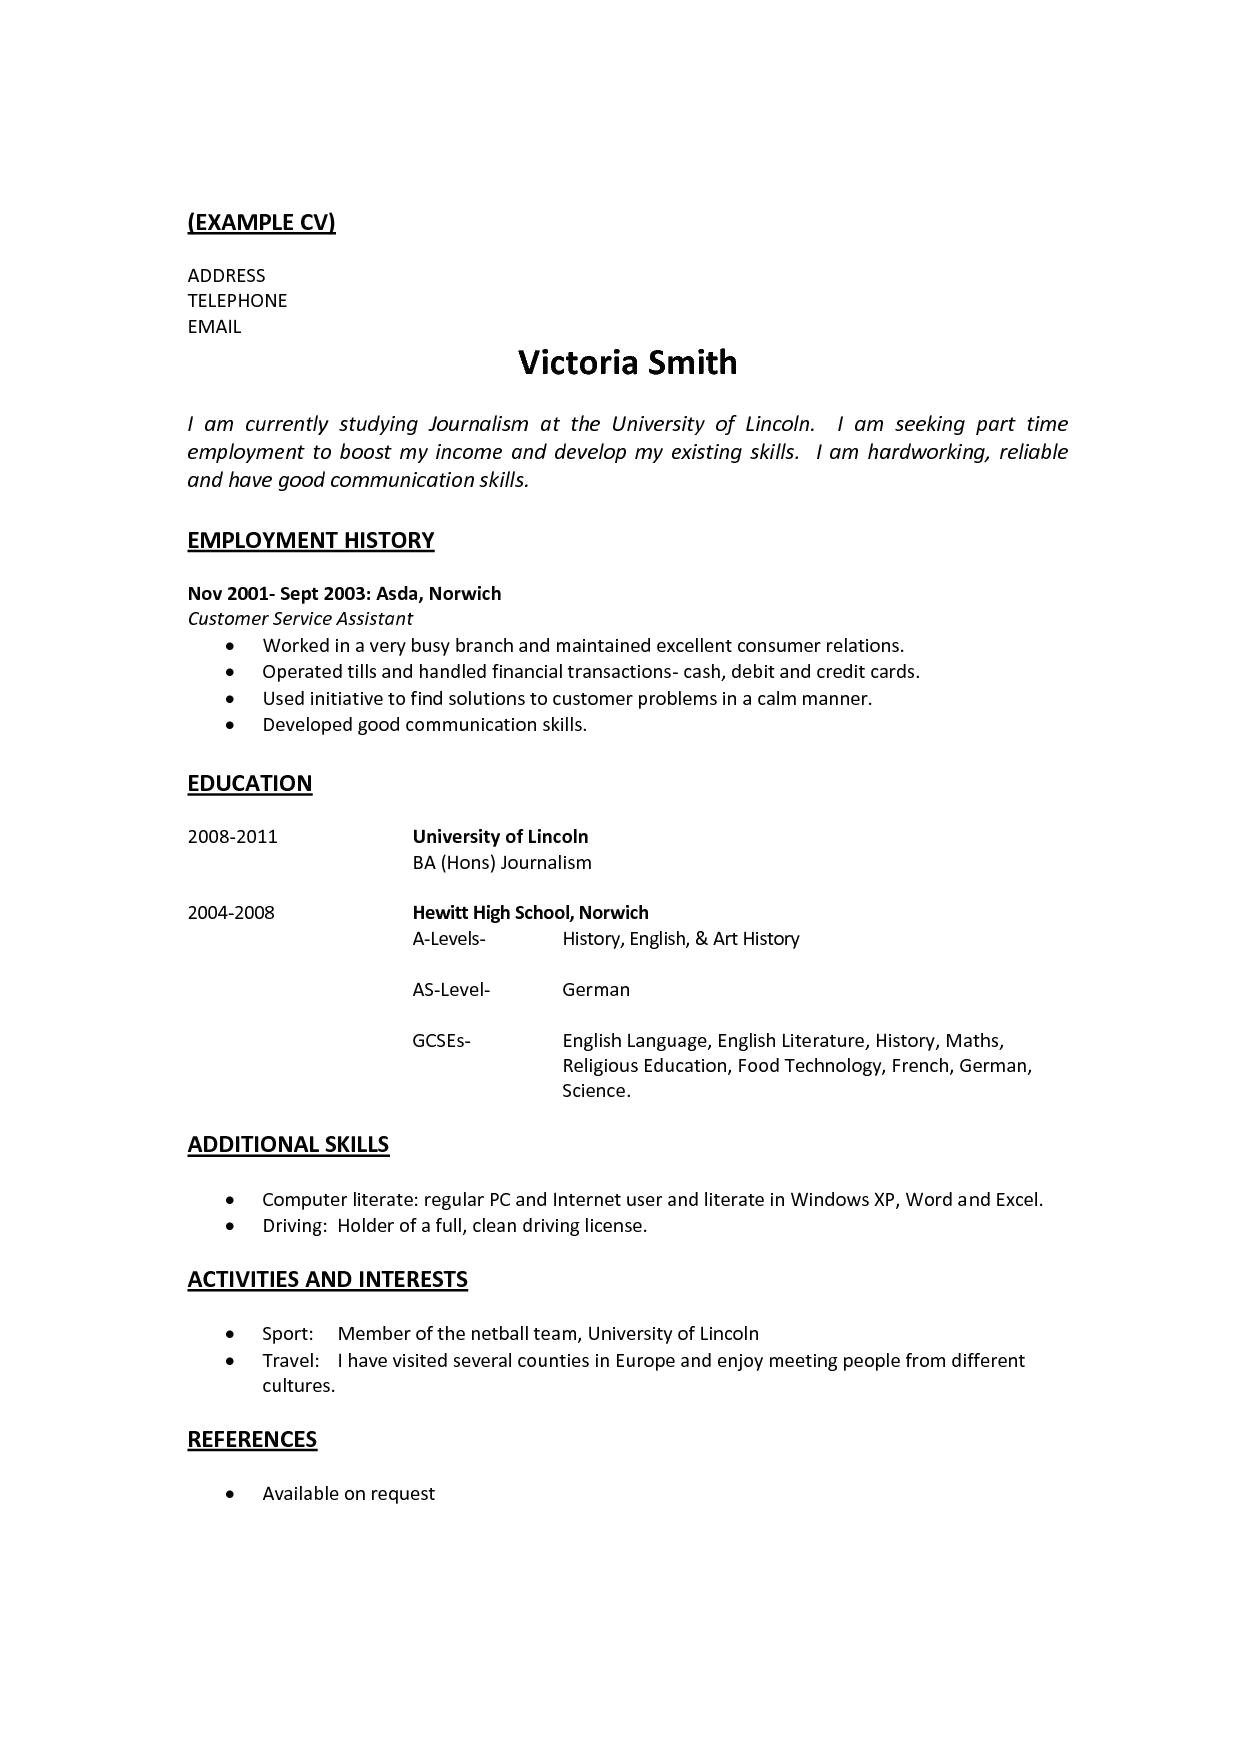 sample resume for high school student with no experience